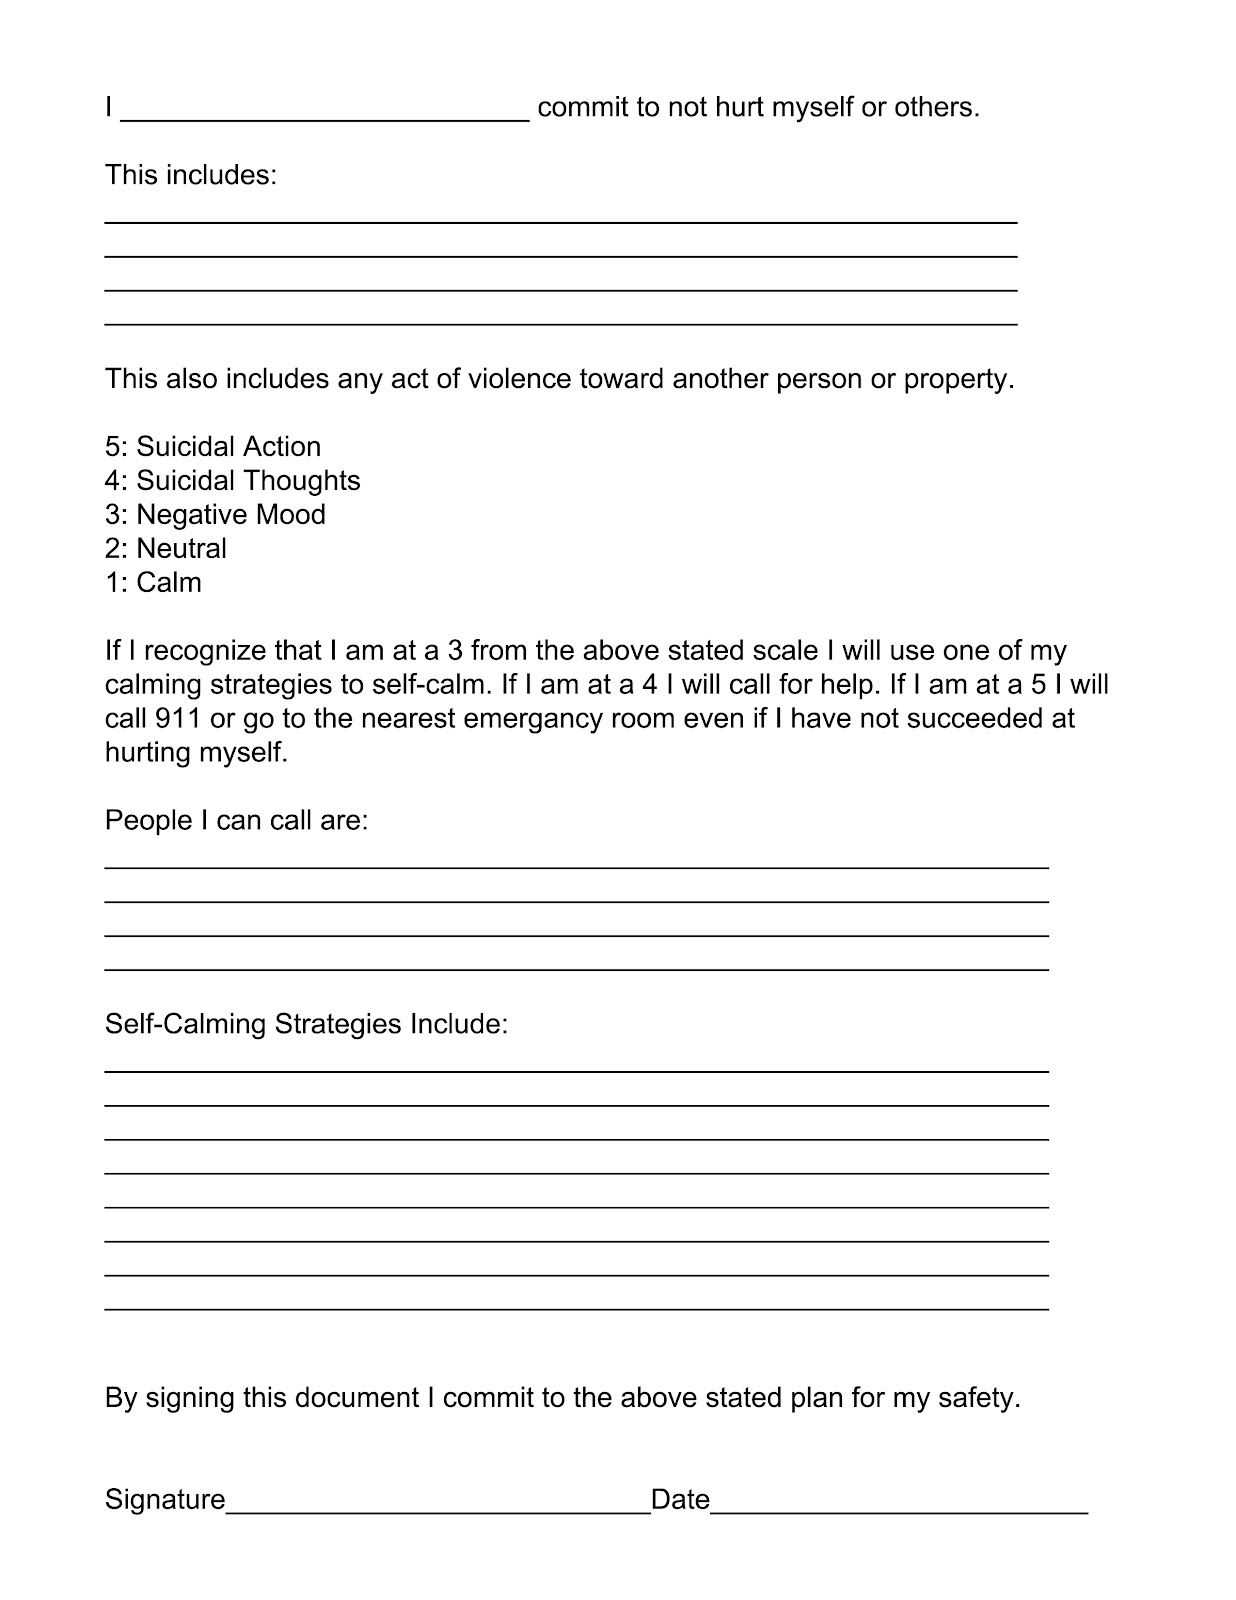 Mental Health Group Worksheets Also Safety Plan for Suicidal or at Risk People